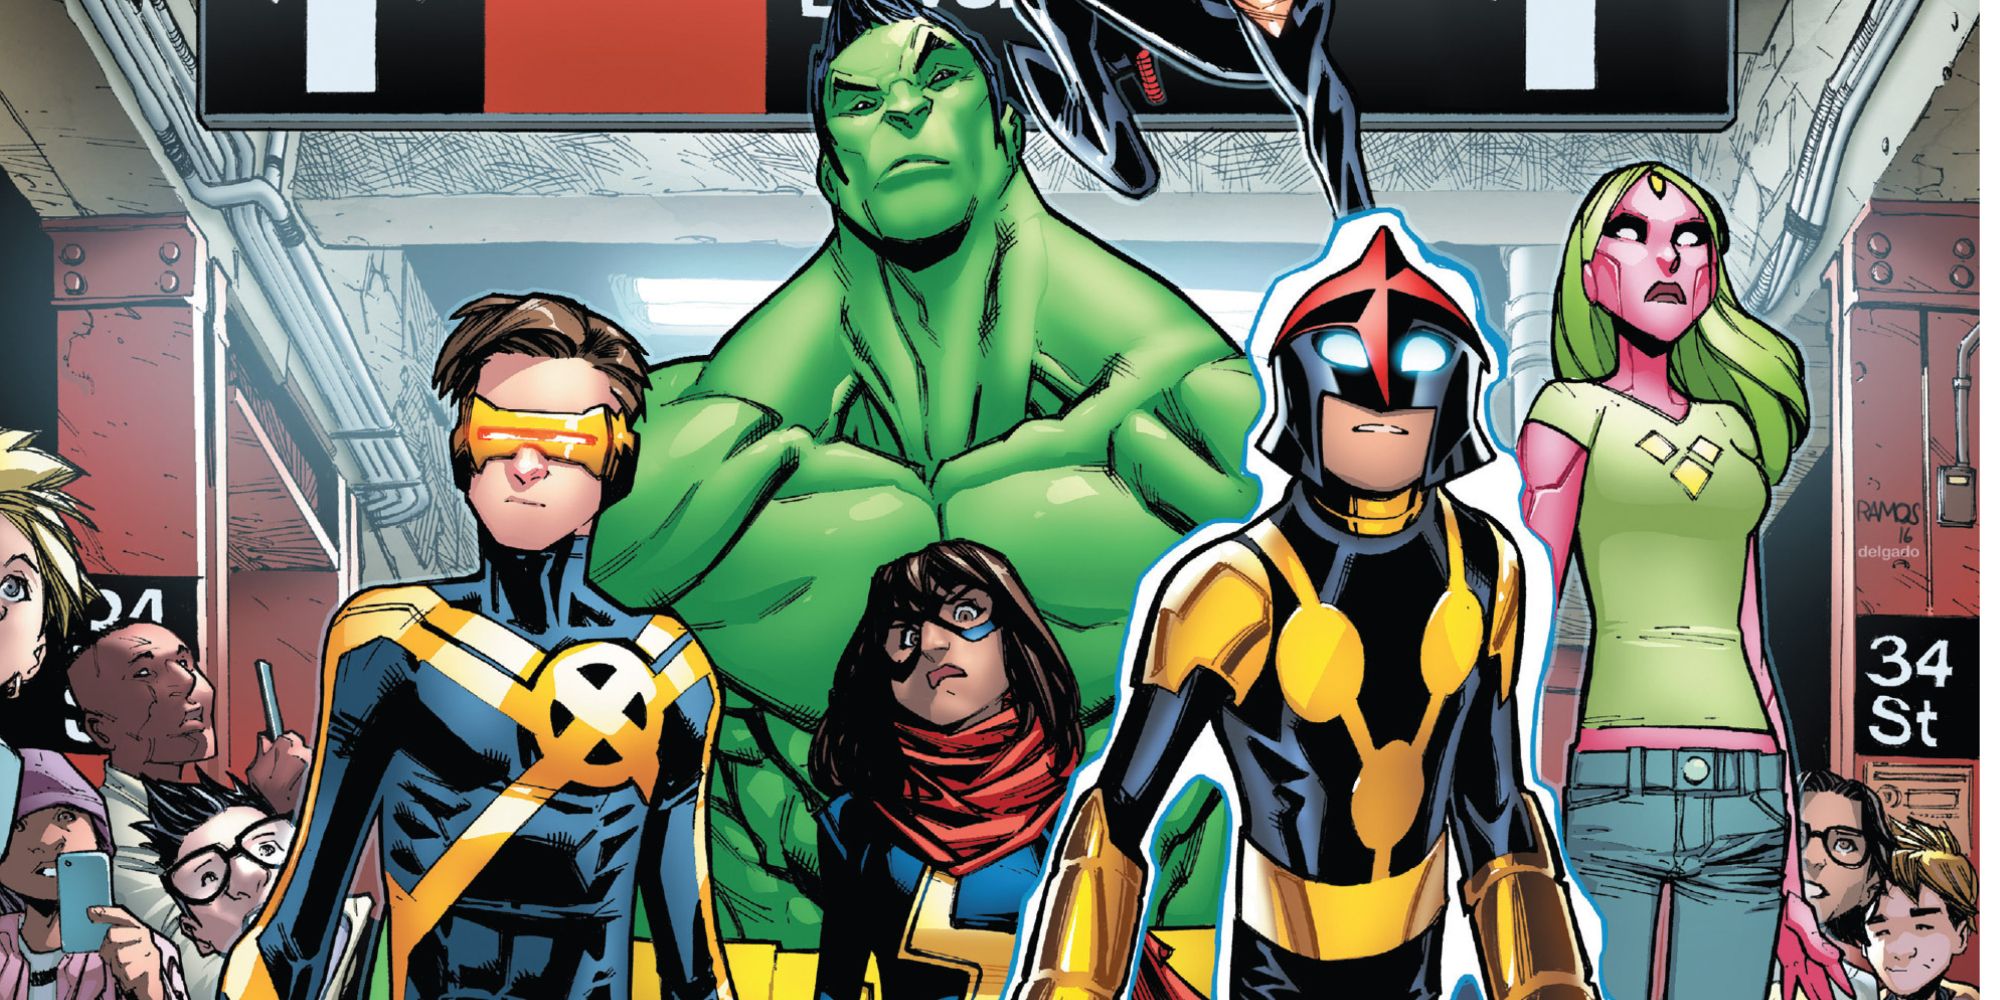 The Champions team assembles with Ms. Marvel in Marvel Comics.